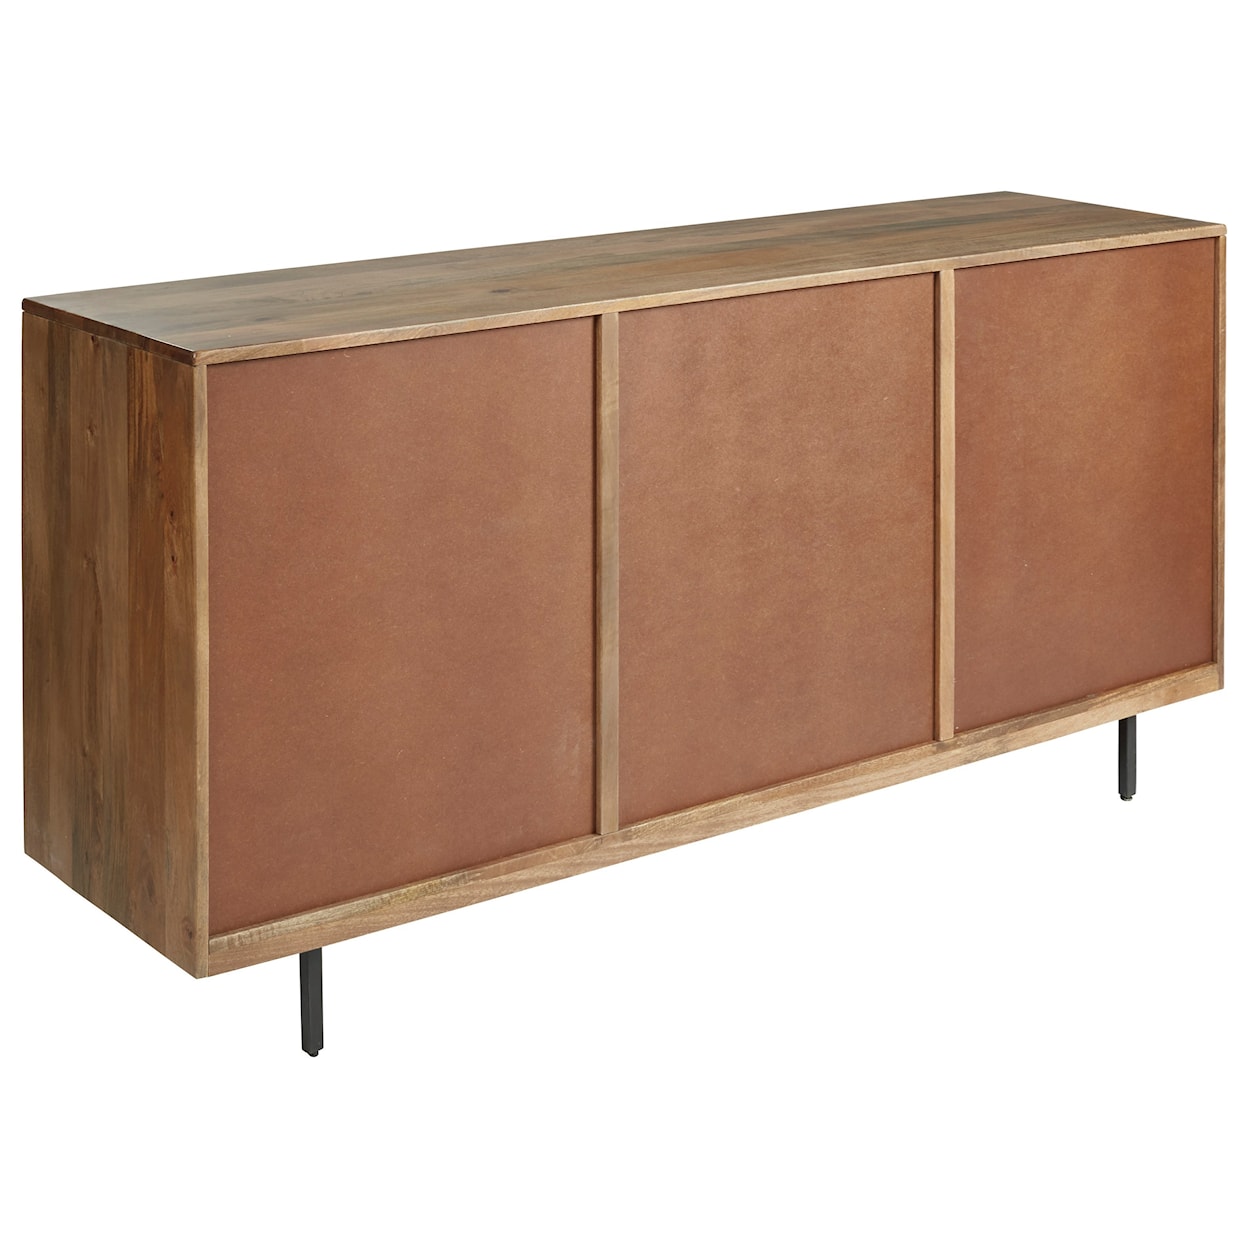 Signature Design by Ashley Freedman Accent Cabinet